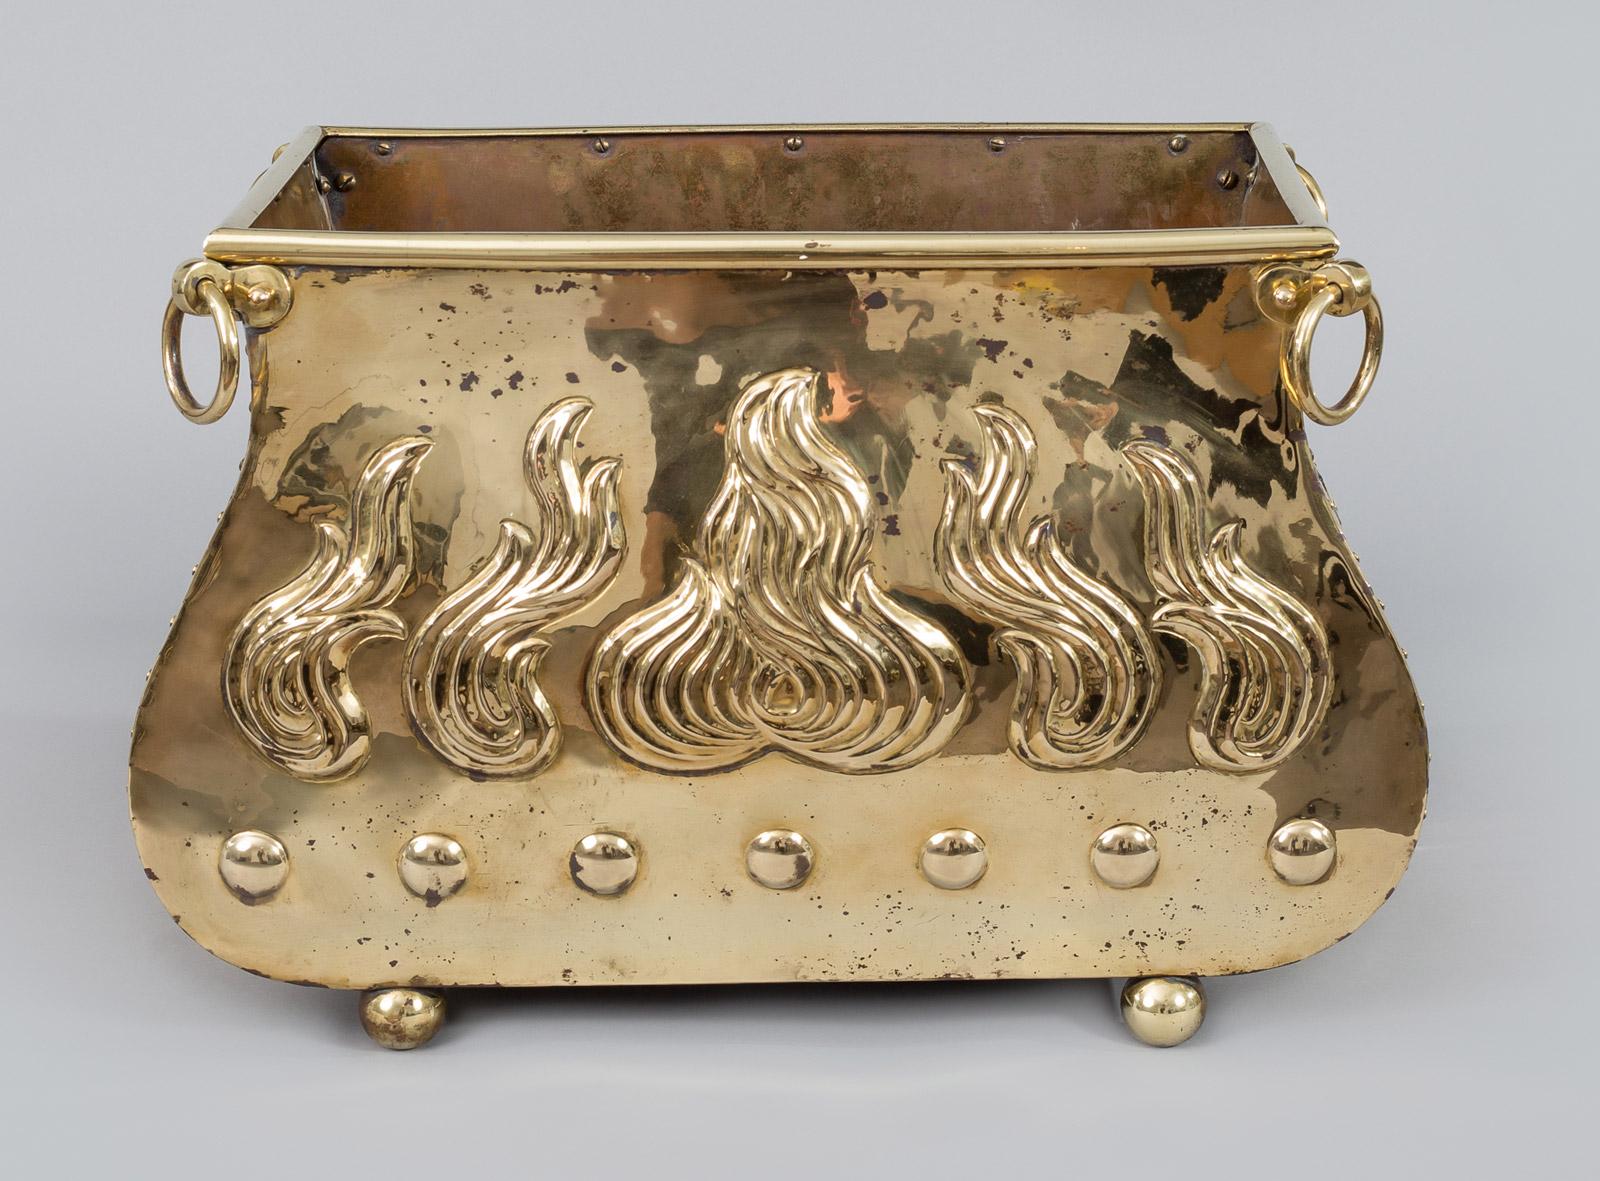 Brass coal scuttle with serpentine shaped sides, embossed flames on the front and back, attached to each corner is a brass ring, mounted on ball feet. Great for fire wood or kindling.